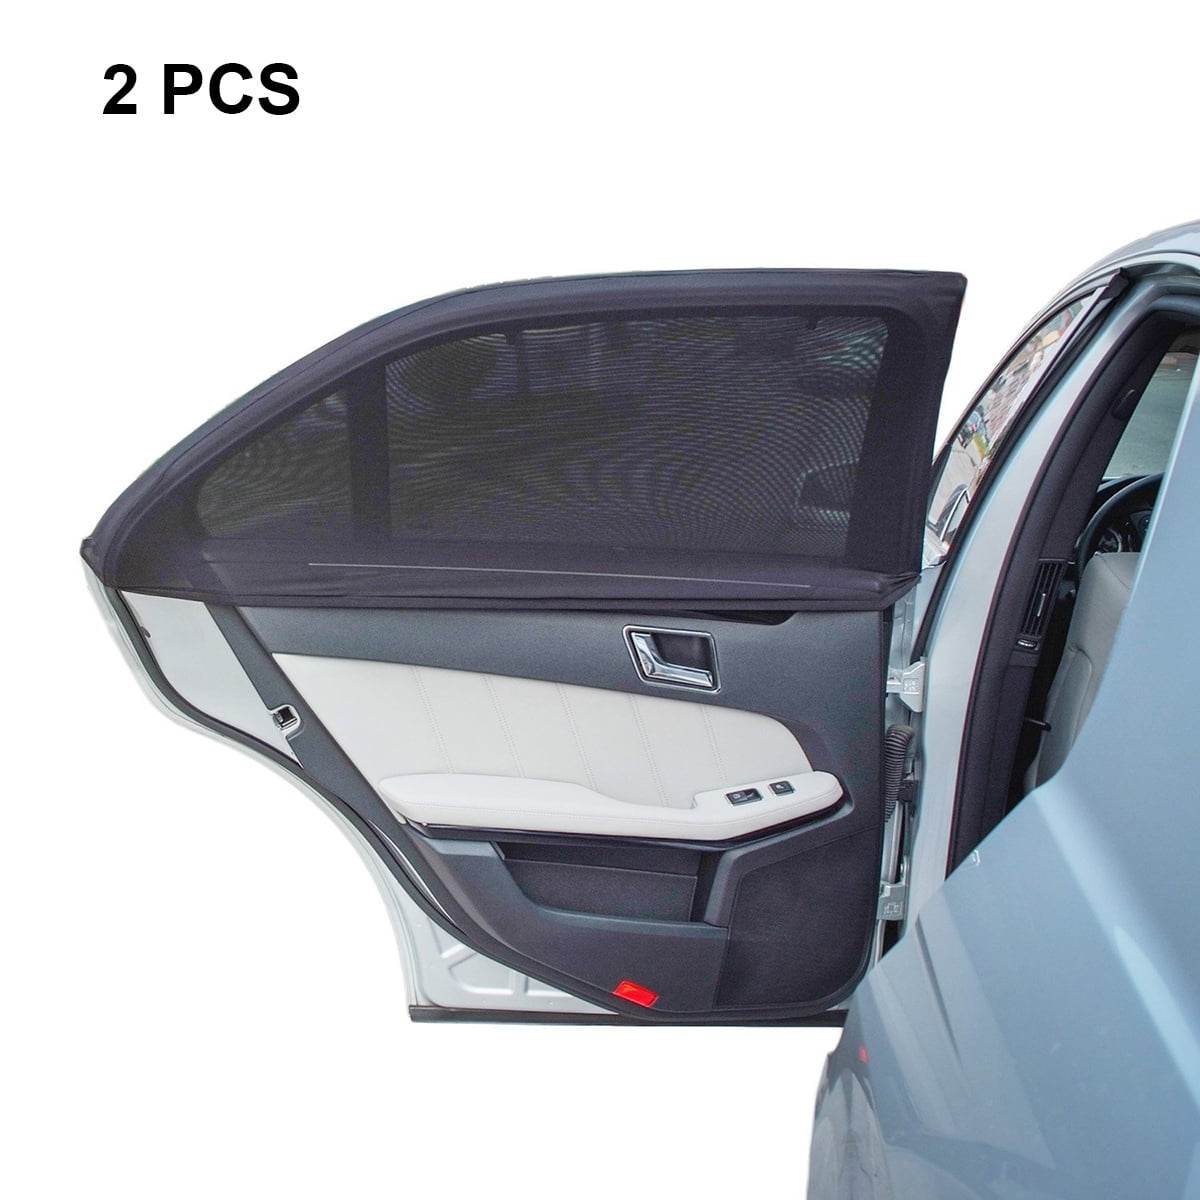 Cover Rear Side Window bedee Car Sun Shade Block UV Rays 2 Pack Car Window Shades Car Sun Shades for Baby Universal Fit Stretch Size 49.6X20.5 inch 